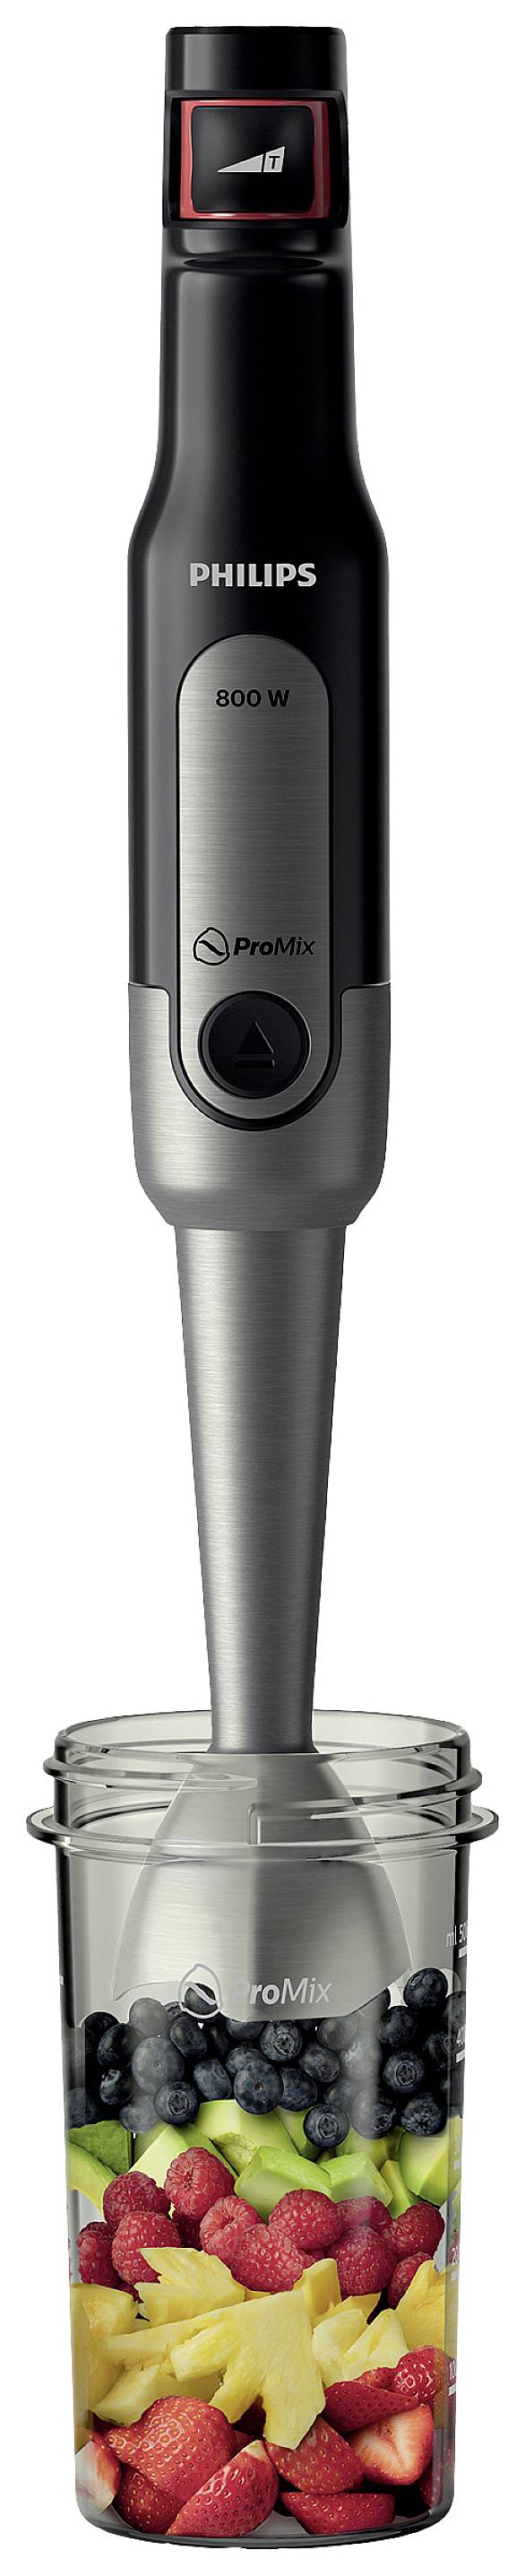 Philips Viva Collection Hand-held mixer 800 W Black, Stainless steel | Conrad.com